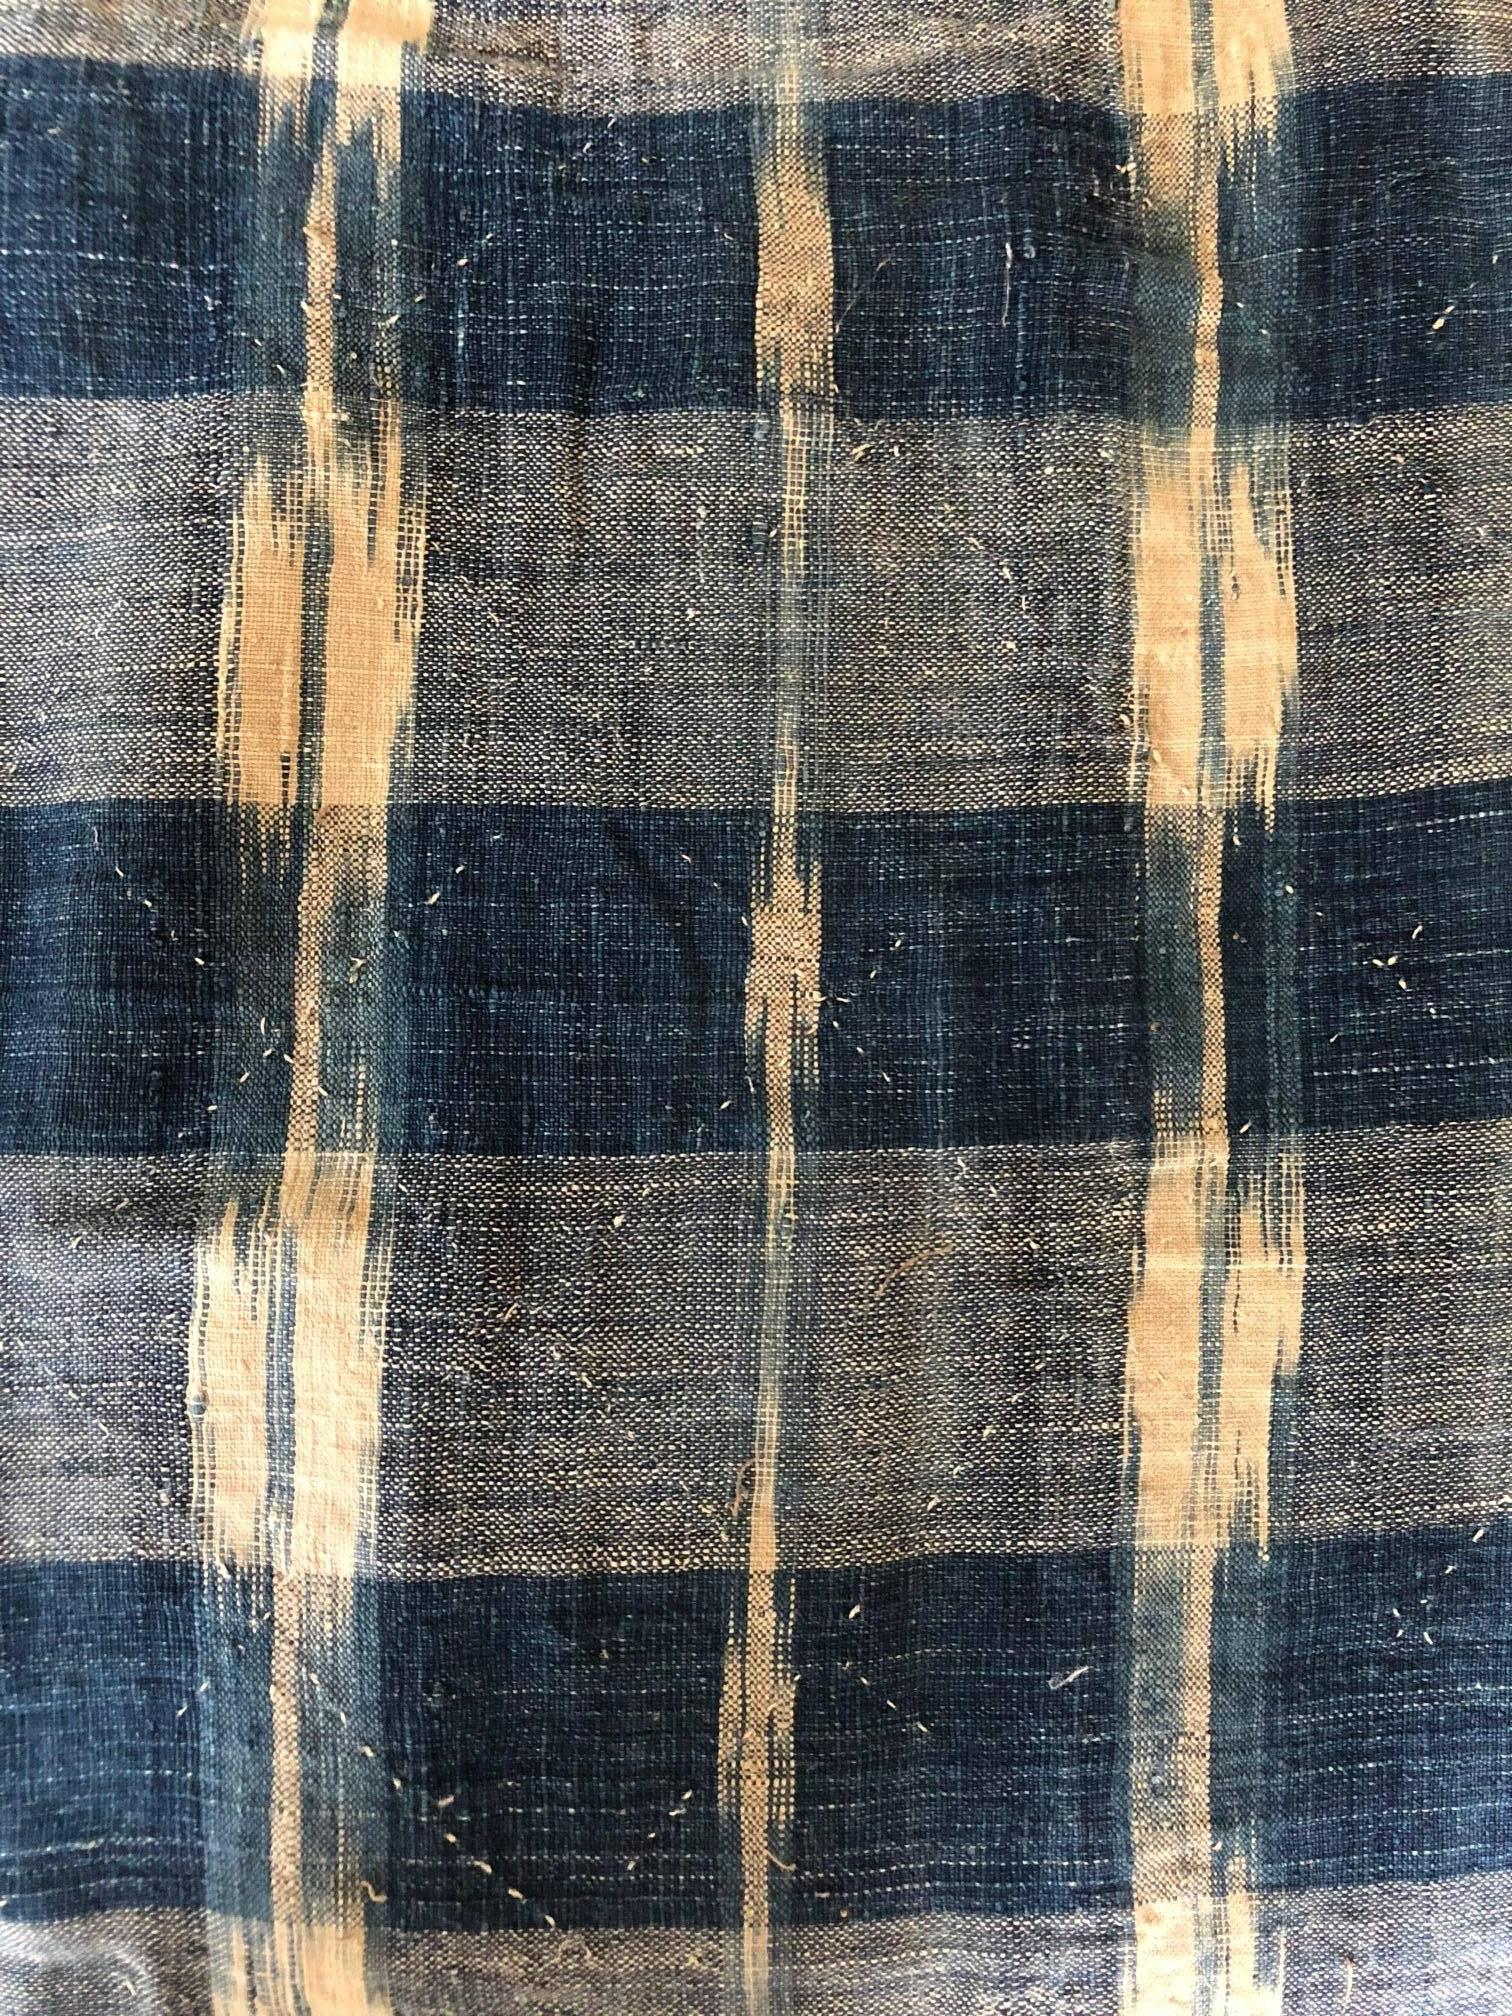 An early 18th century French home spun, handwoven indigo dyed antique linen Ikat. This piece is hand-stitched in a diamond pattern. Handmade textile, antique fabric lined. This piece is sewn together in to parts in opposing Ikat directions.